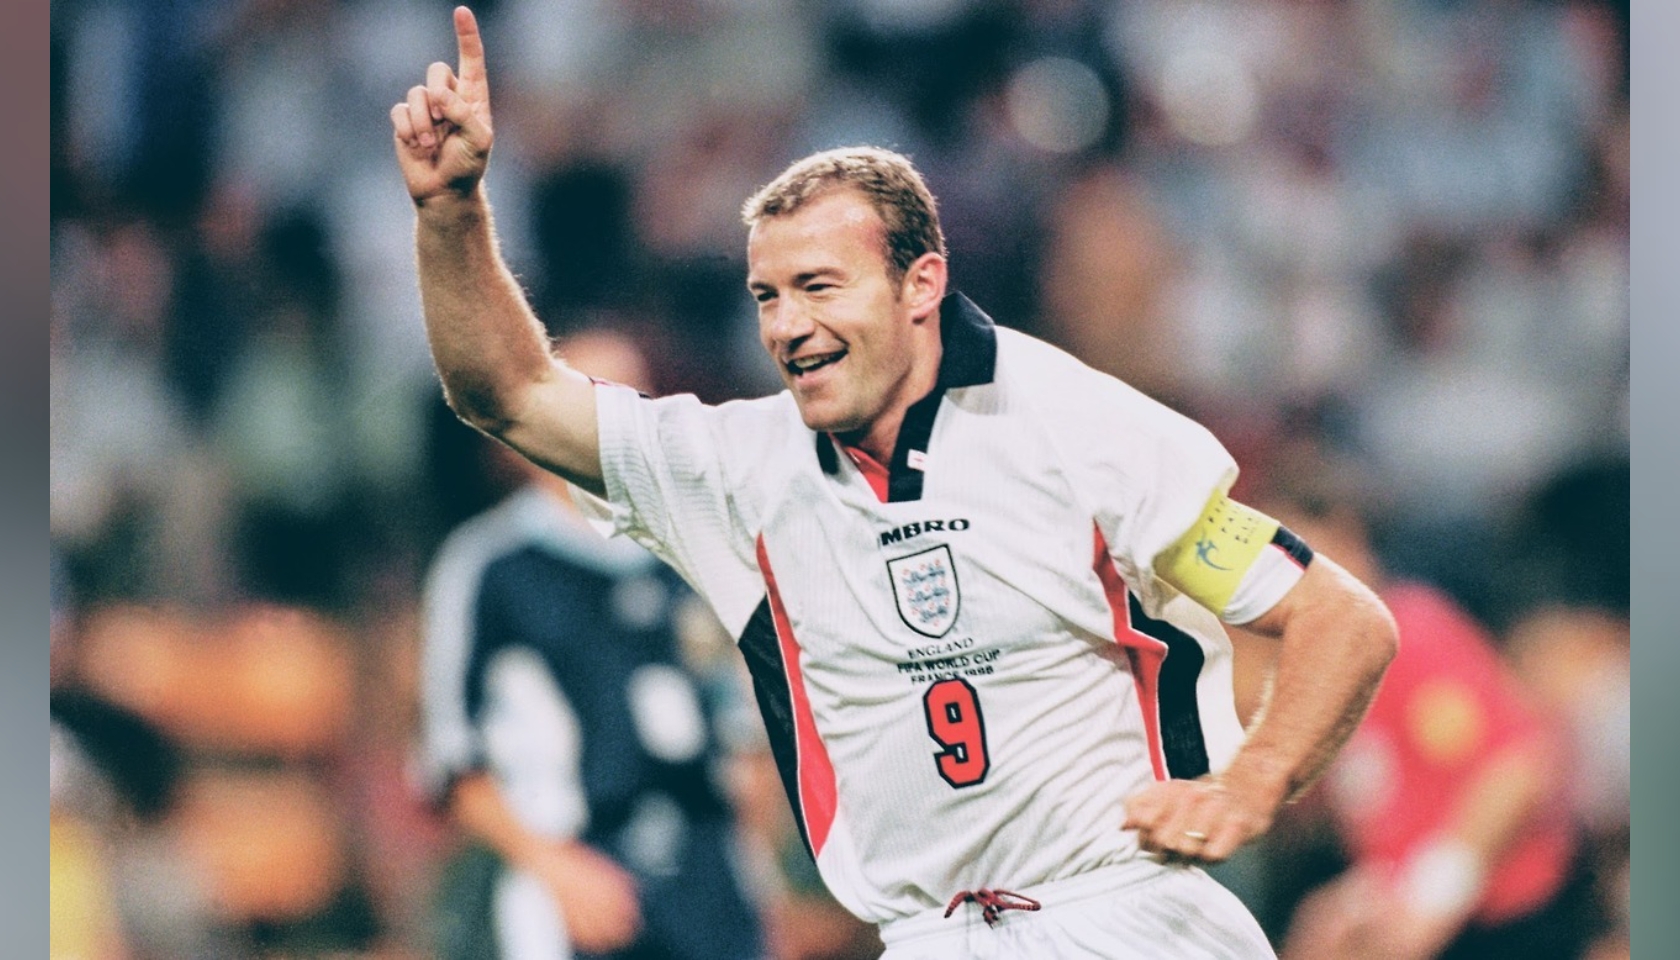 Alan Shearer's authentic England jersey